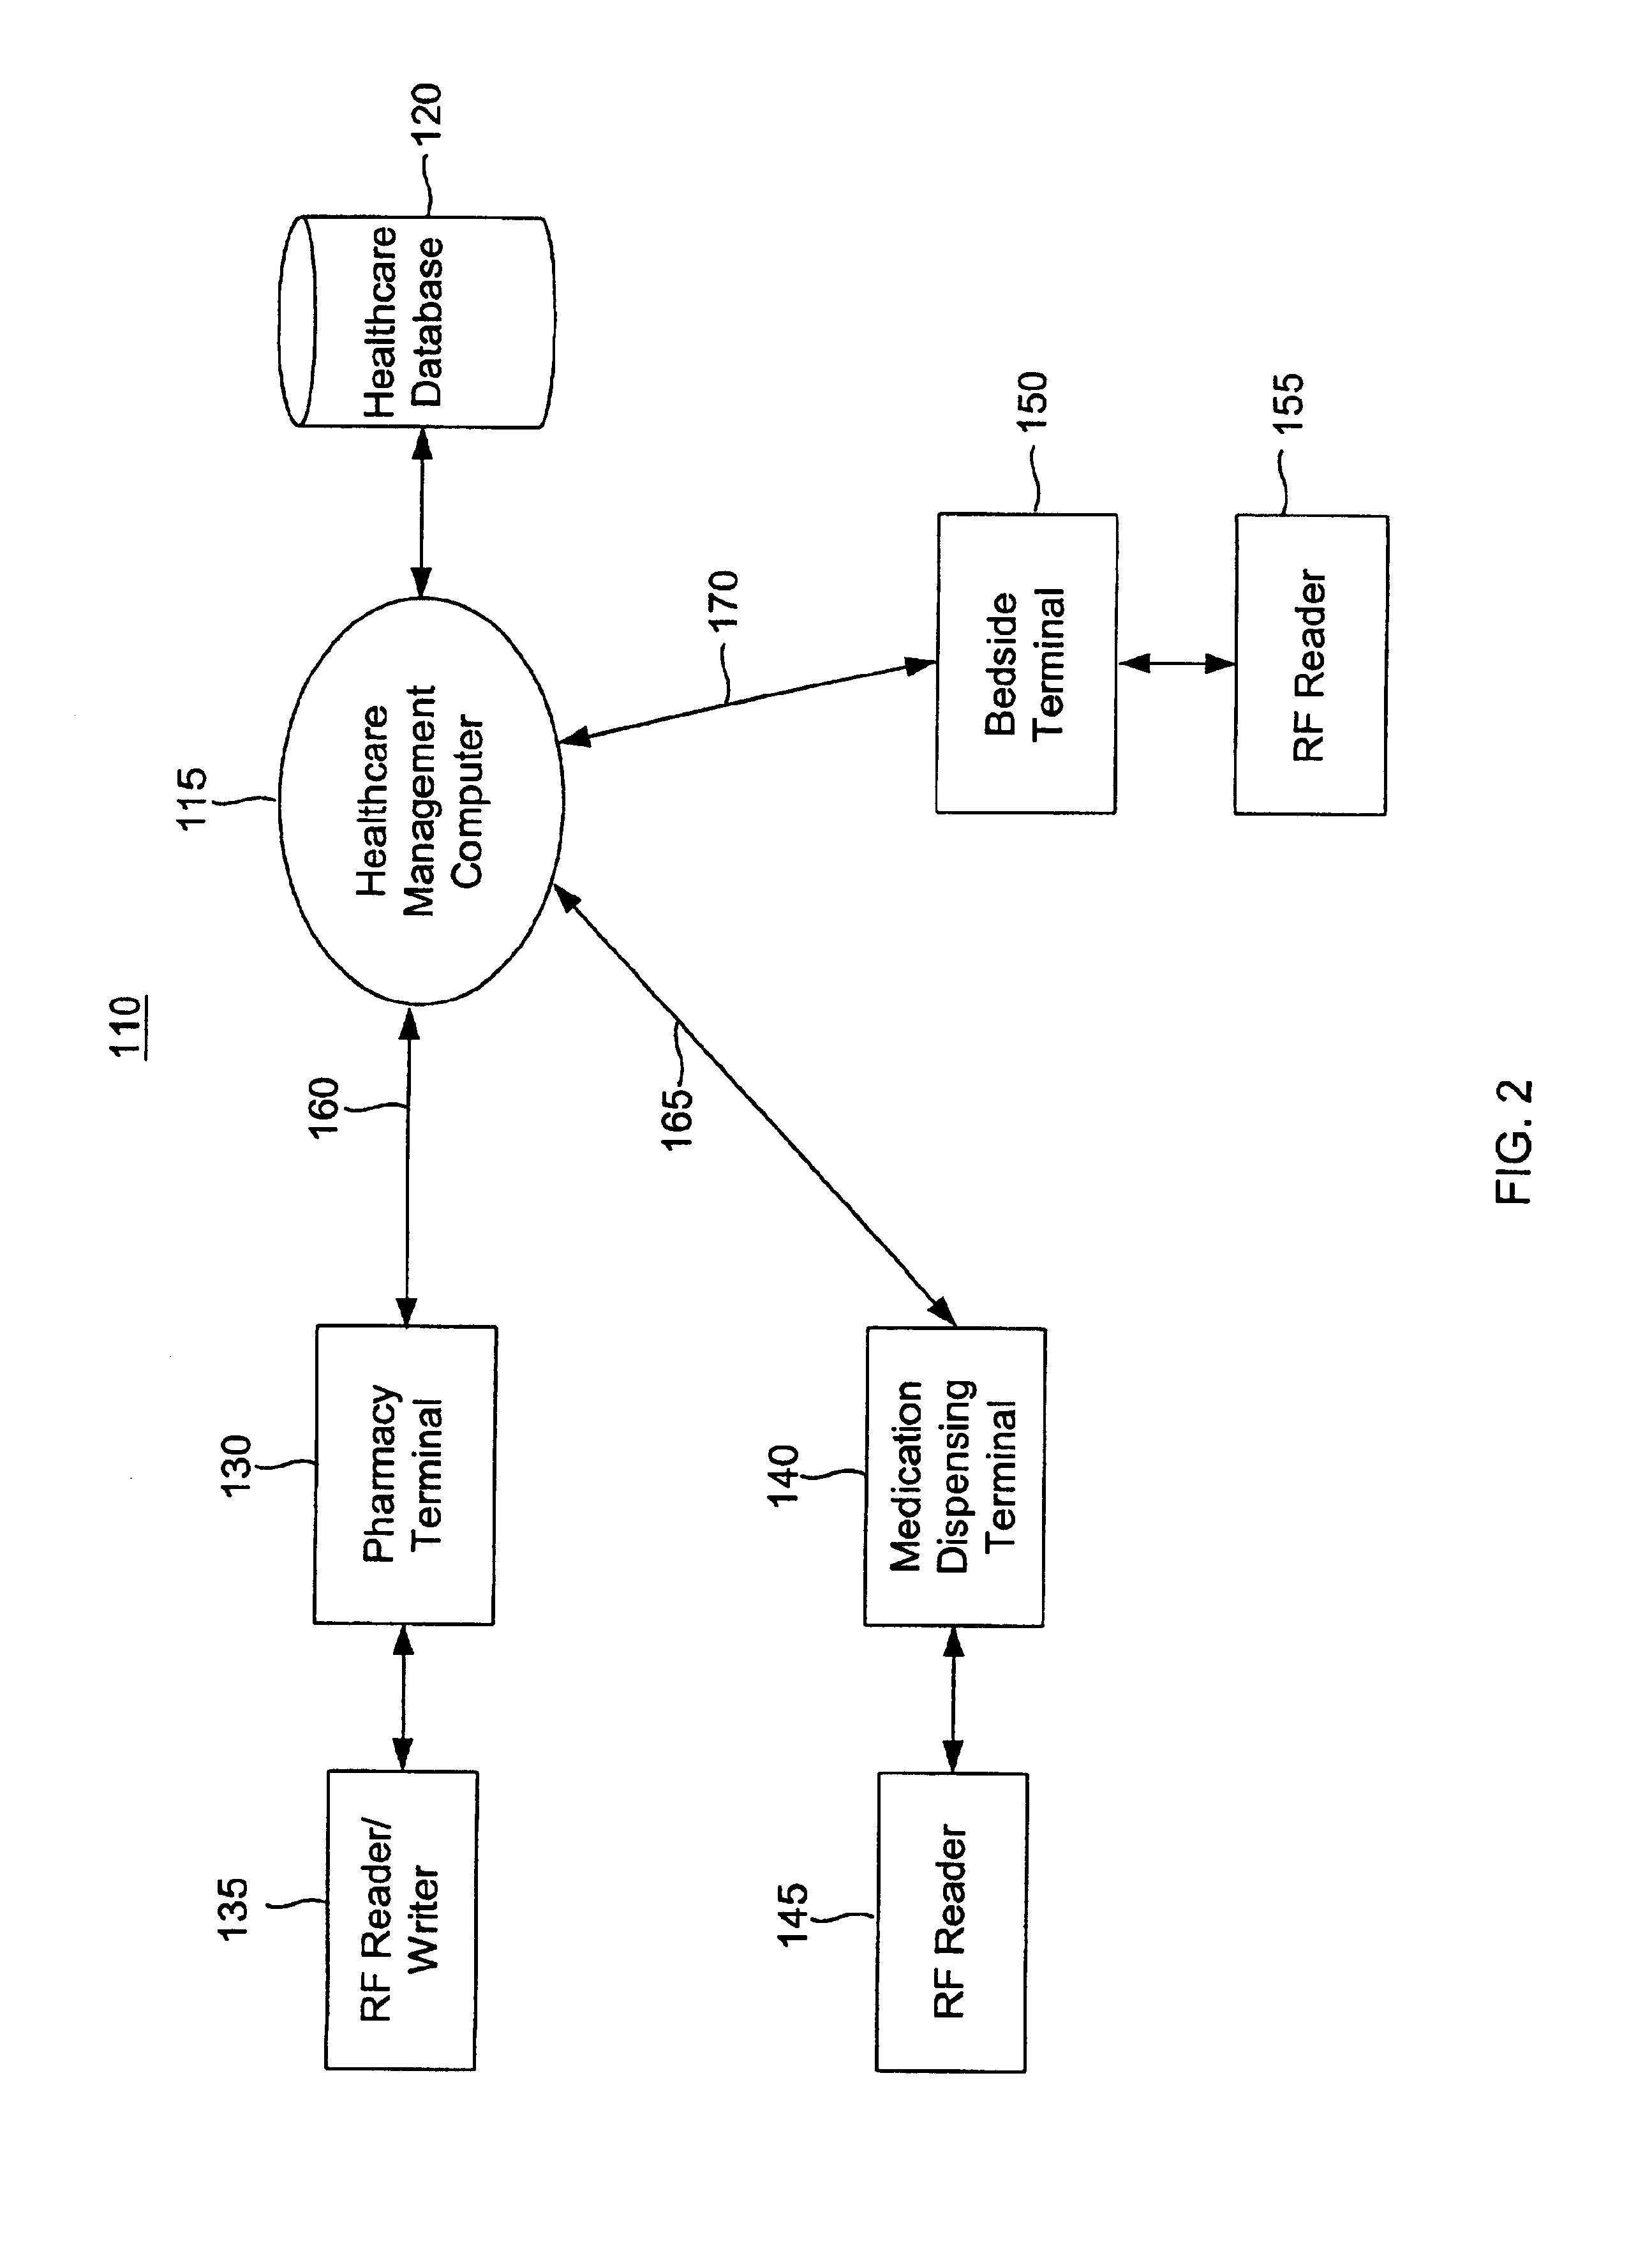 Systems and methods for tracking pharmaceuticals within a facility